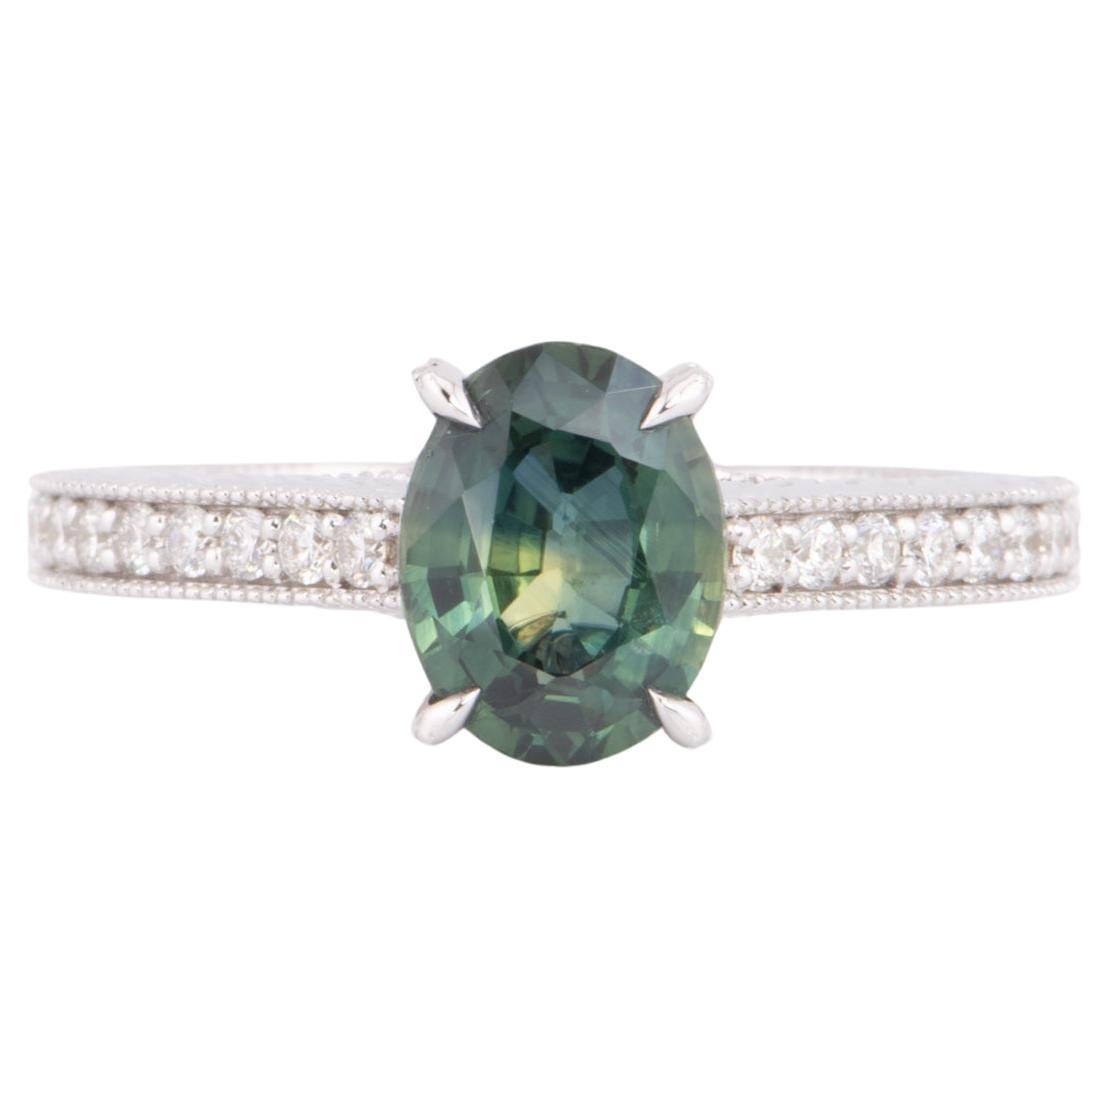 2.99ct Teal Sapphire Engagement Ring 14K White Gold with Leaf Engraving R6598 For Sale